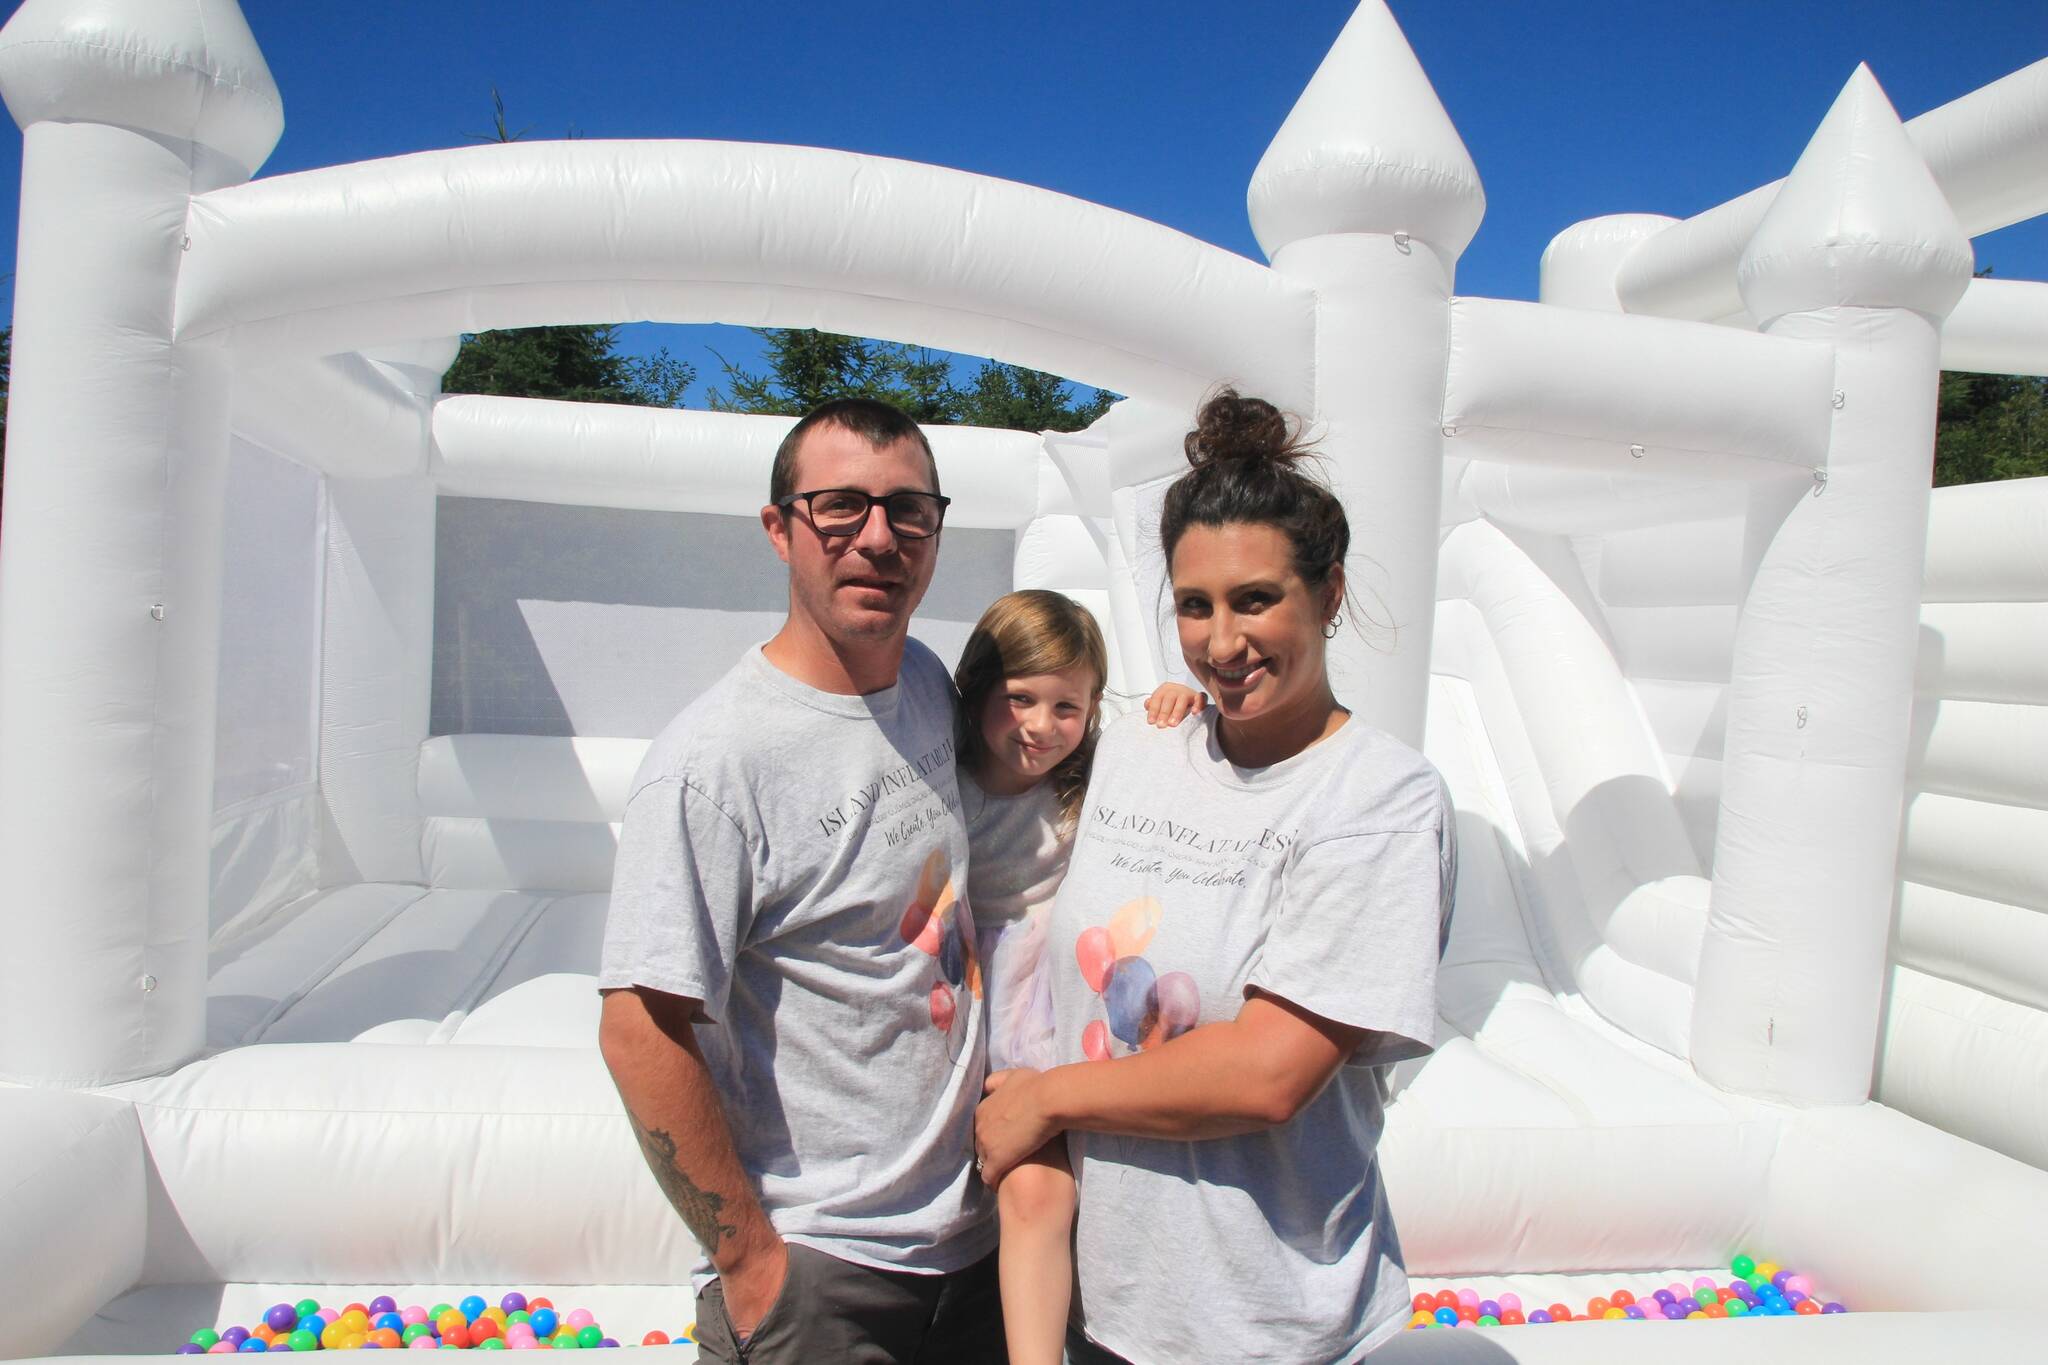 Marri Metz poses with her husband Tyson and their daughter Teagan. (Photo by Luisa Loi/Whidbey News-Times)